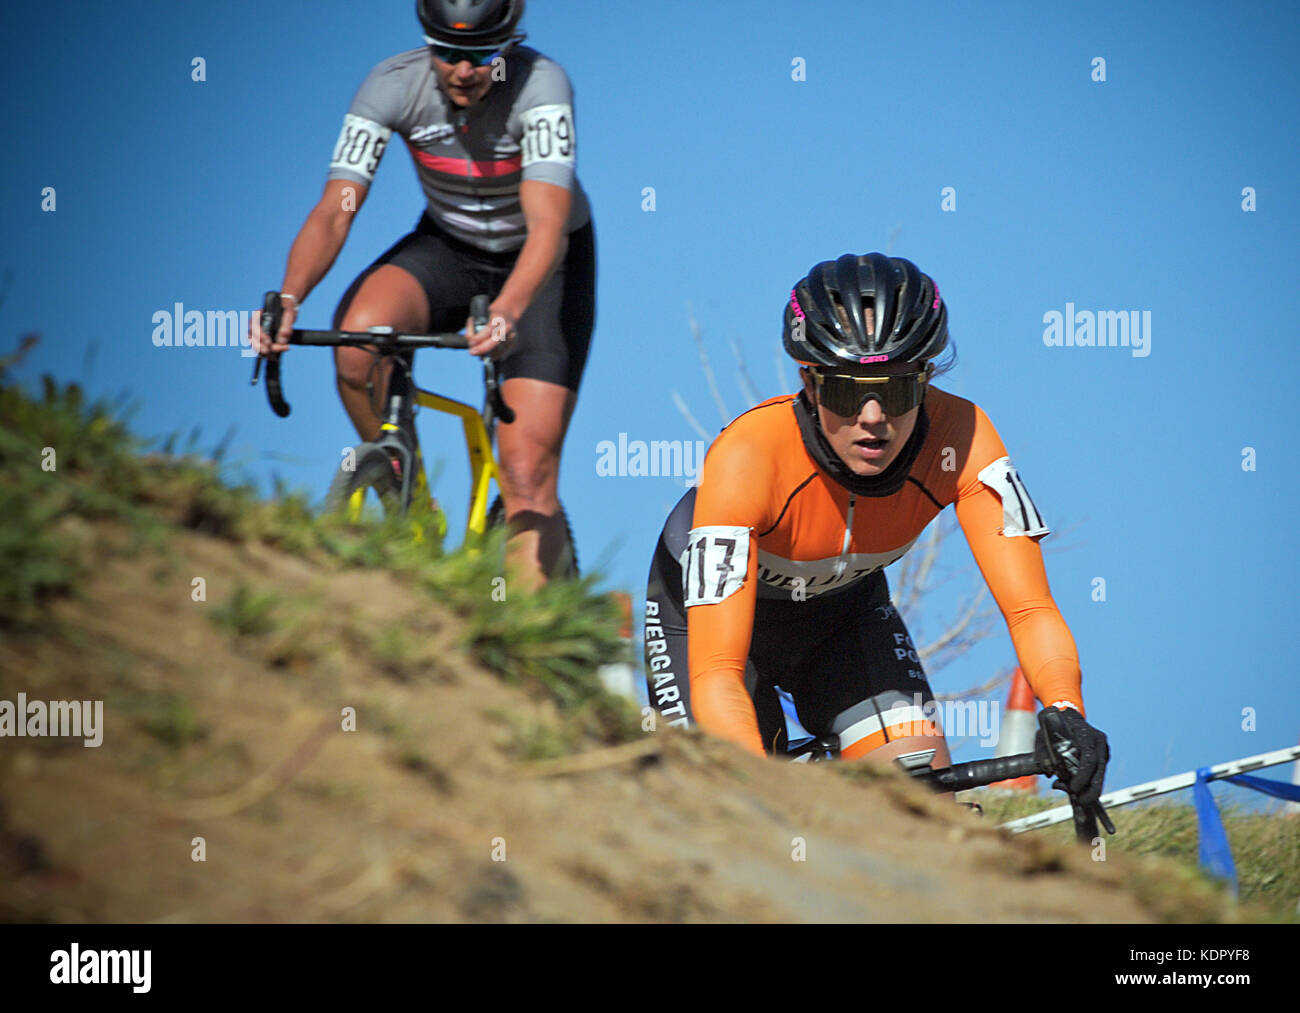 October 14, 2017 - Women's elite cyclists need total concentration as they enter the steep and difficult off-camber section of the U.S. Open of Cyclocross, Valmont Bike Park, Boulder, Colorado. Stock Photo